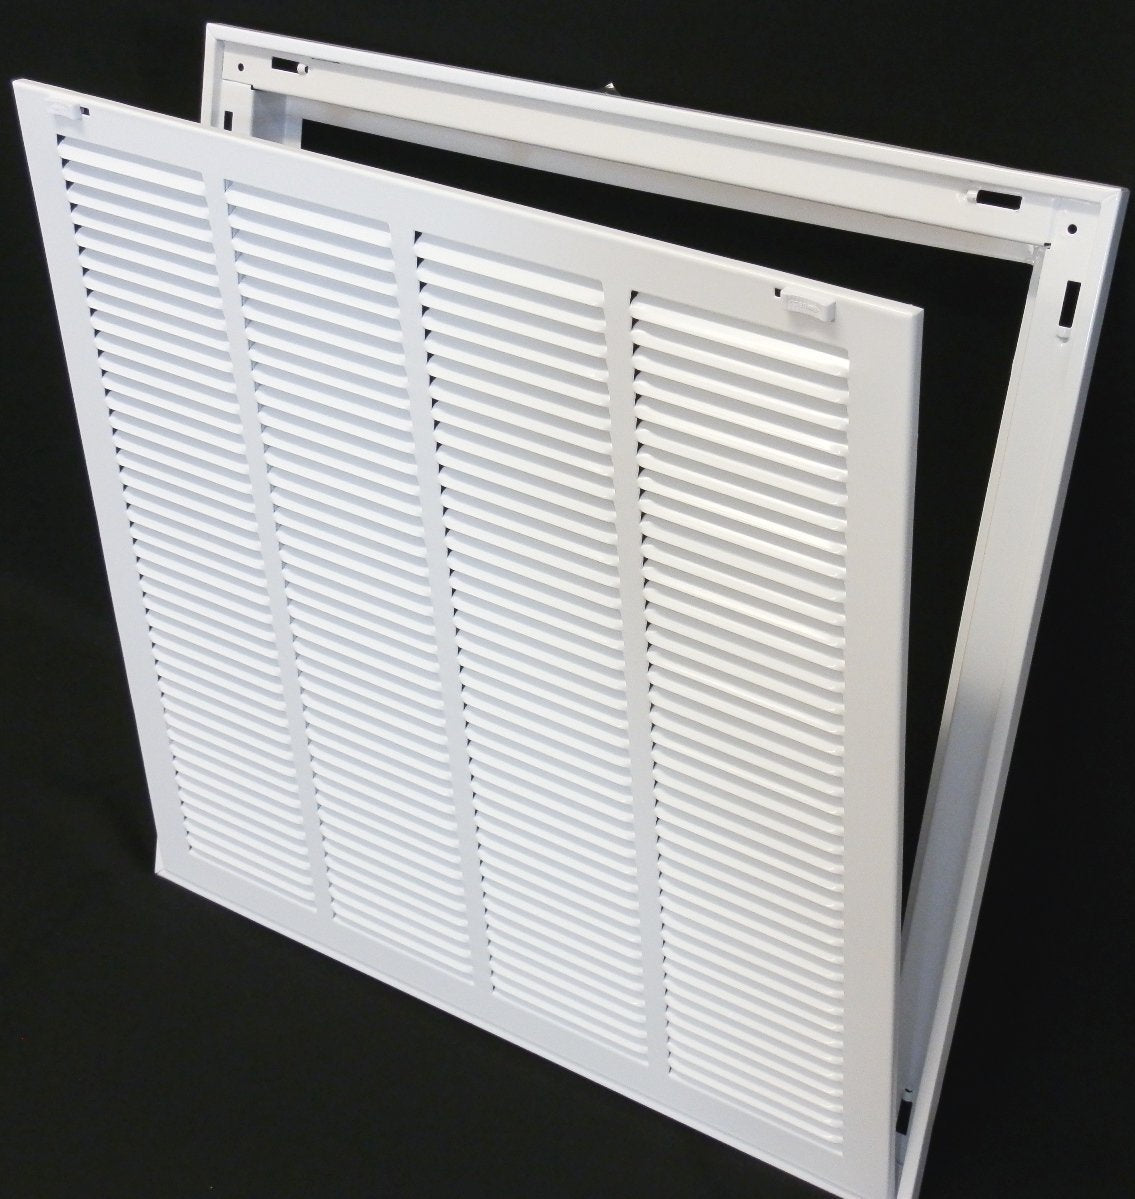 22&quot; X 36&quot; Steel Return Air Filter Grille for 1&quot; Filter - Removable Frame - [Outer Dimensions: 24 5/8&quot; X 38 5/8&quot;]